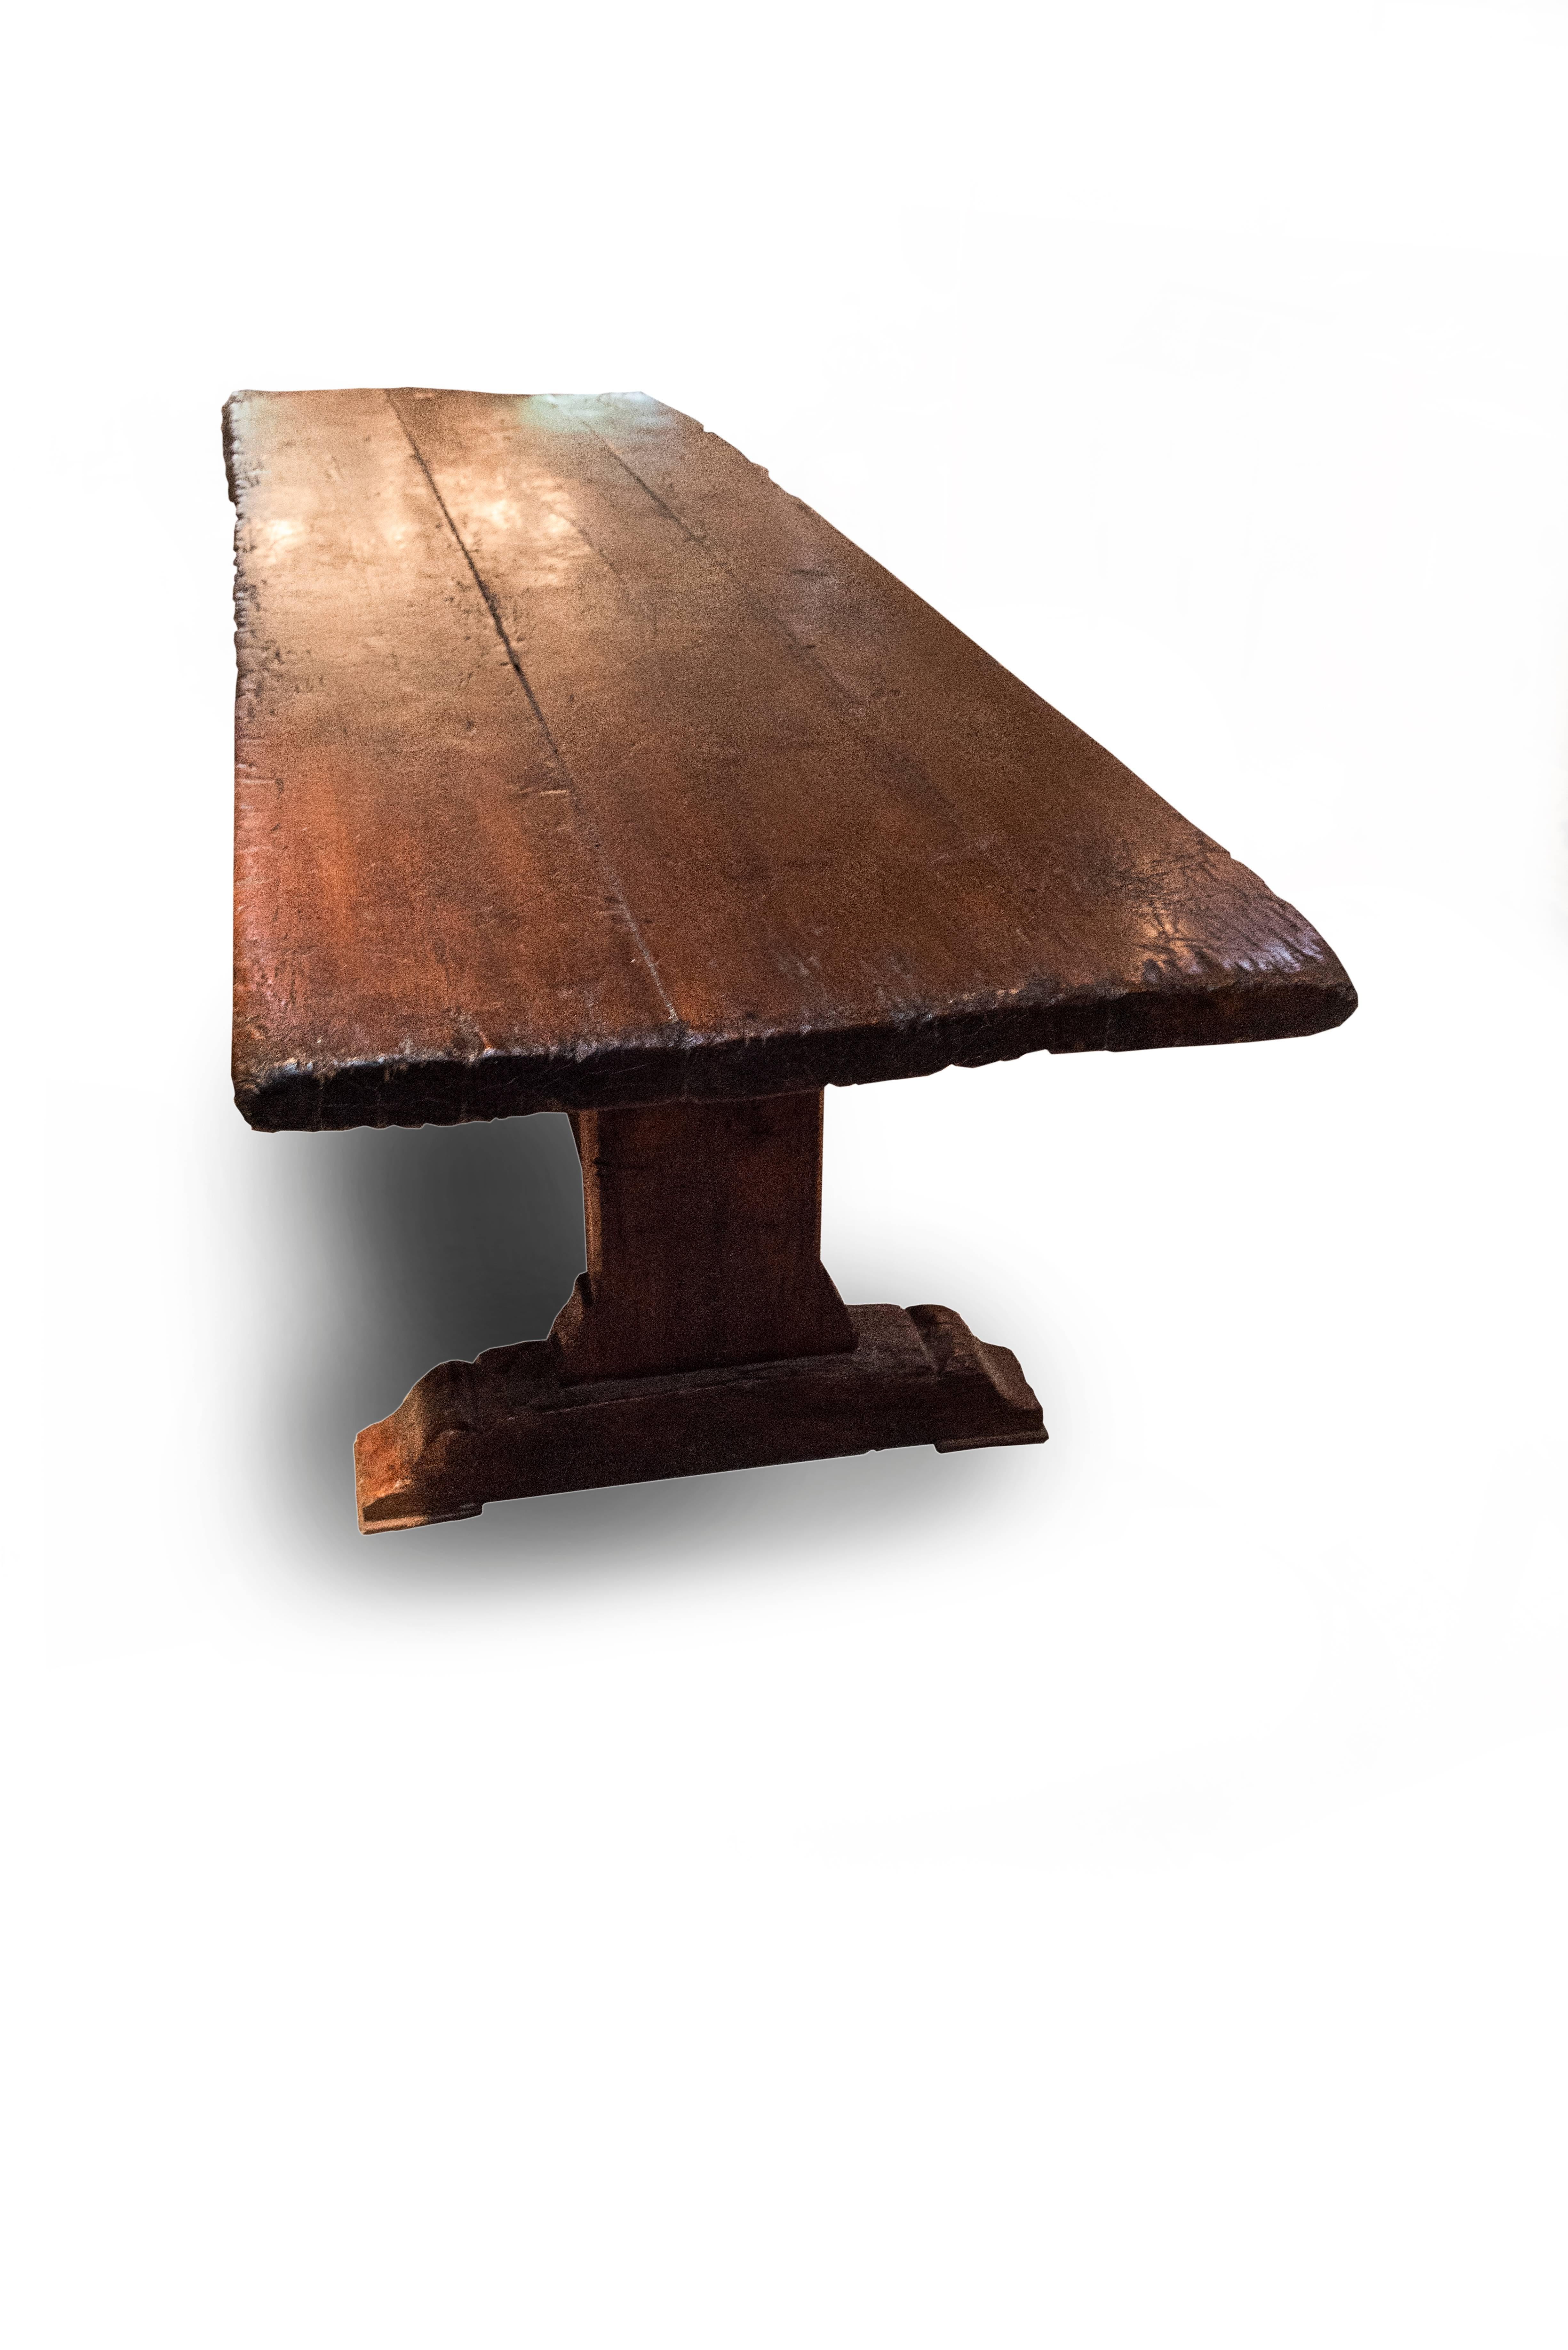 A rare and early 19th century rough oak monastery table that came out of a monastery in Haut Provence, France. The top is 2.25 inches thick. The table retains its beautiful rich, original color and patina from its years in the French monastery. It